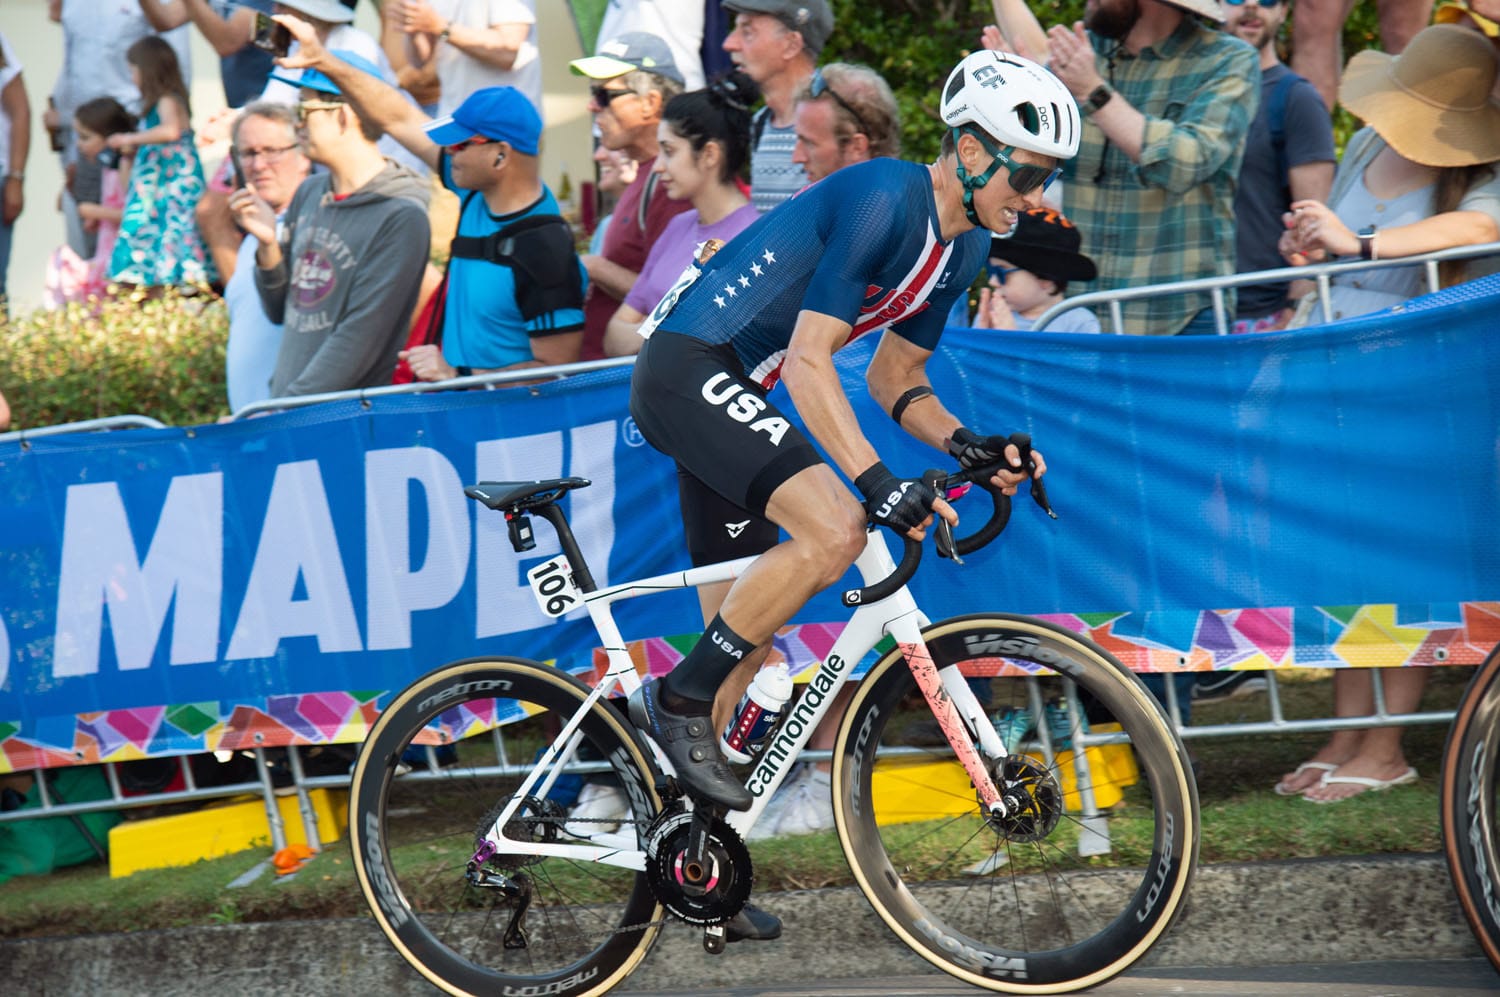 Team Usa Riding Momentum From The Tour De France Neilson Powless Has Big Goals For Cycling Worlds 0649